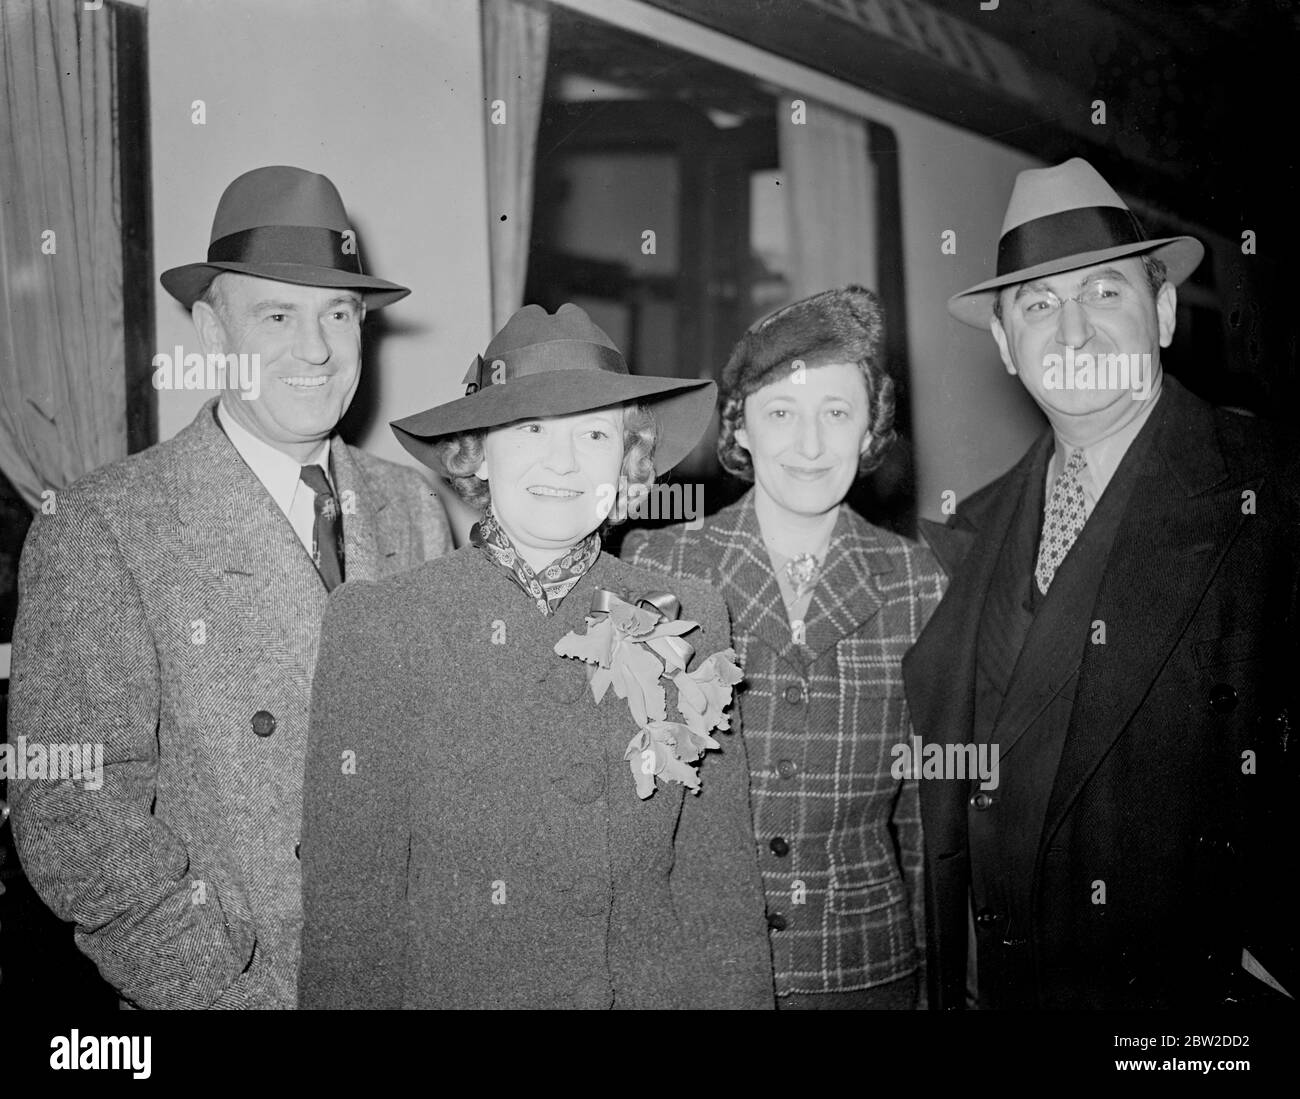 Mr Sam Wood, the Hollywood film director, arrived at Paddington station on the Queen Mary boat train to direct Robert Donat in Goodbye Mr Chips, a new British film. Mr Wood was greeted by Mr Ben Goetz, manager director of Metro-Goldwyn-Mayer British Studios. Photo shows: Left to right, Mr and Mrs Sam Wood with Mrs Goetz and Mr Ben Goetz, who welcomed them. 23 October 1938 Stock Photo